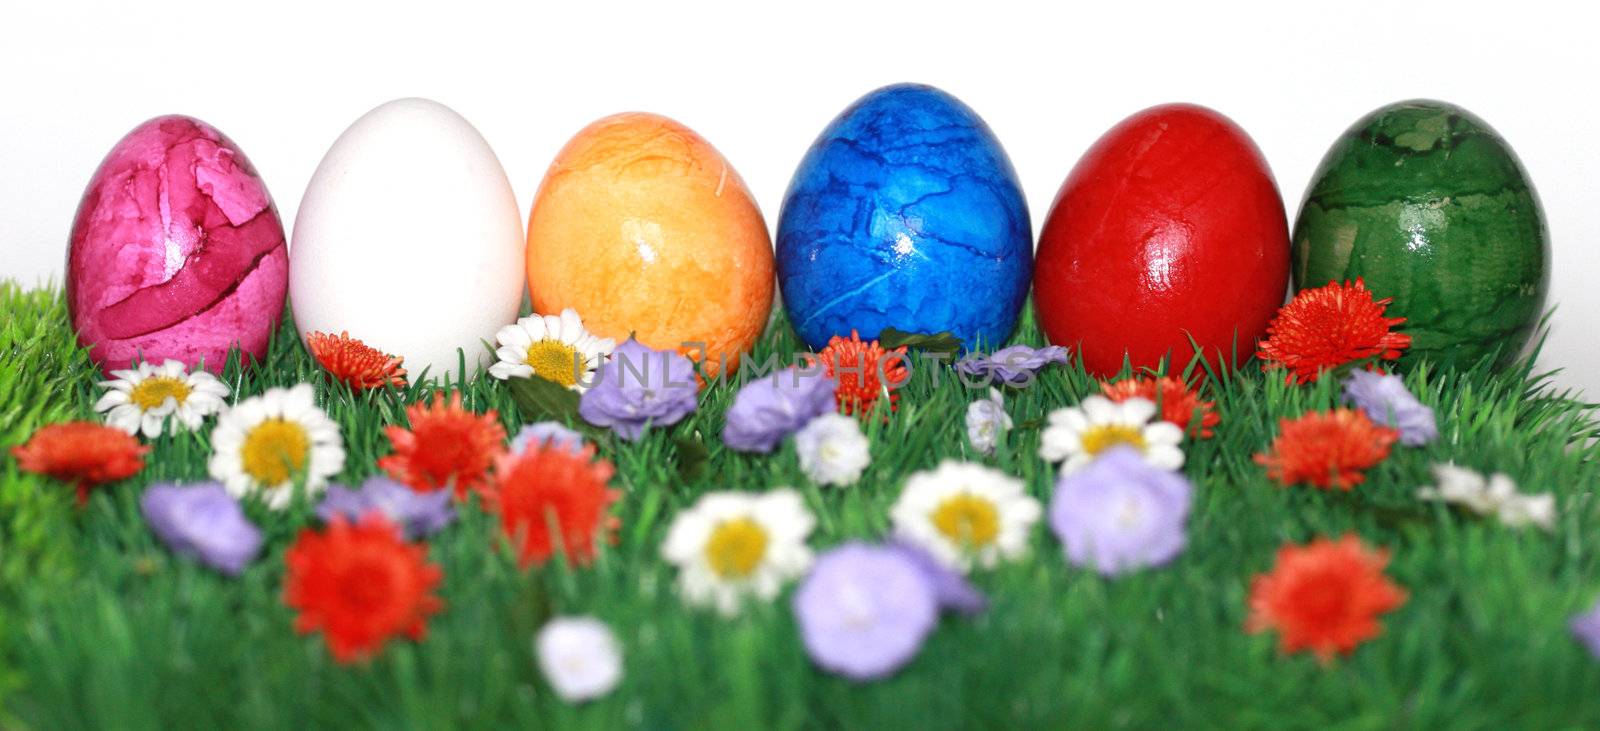 Colorfully painted Easter eggs by photochecker